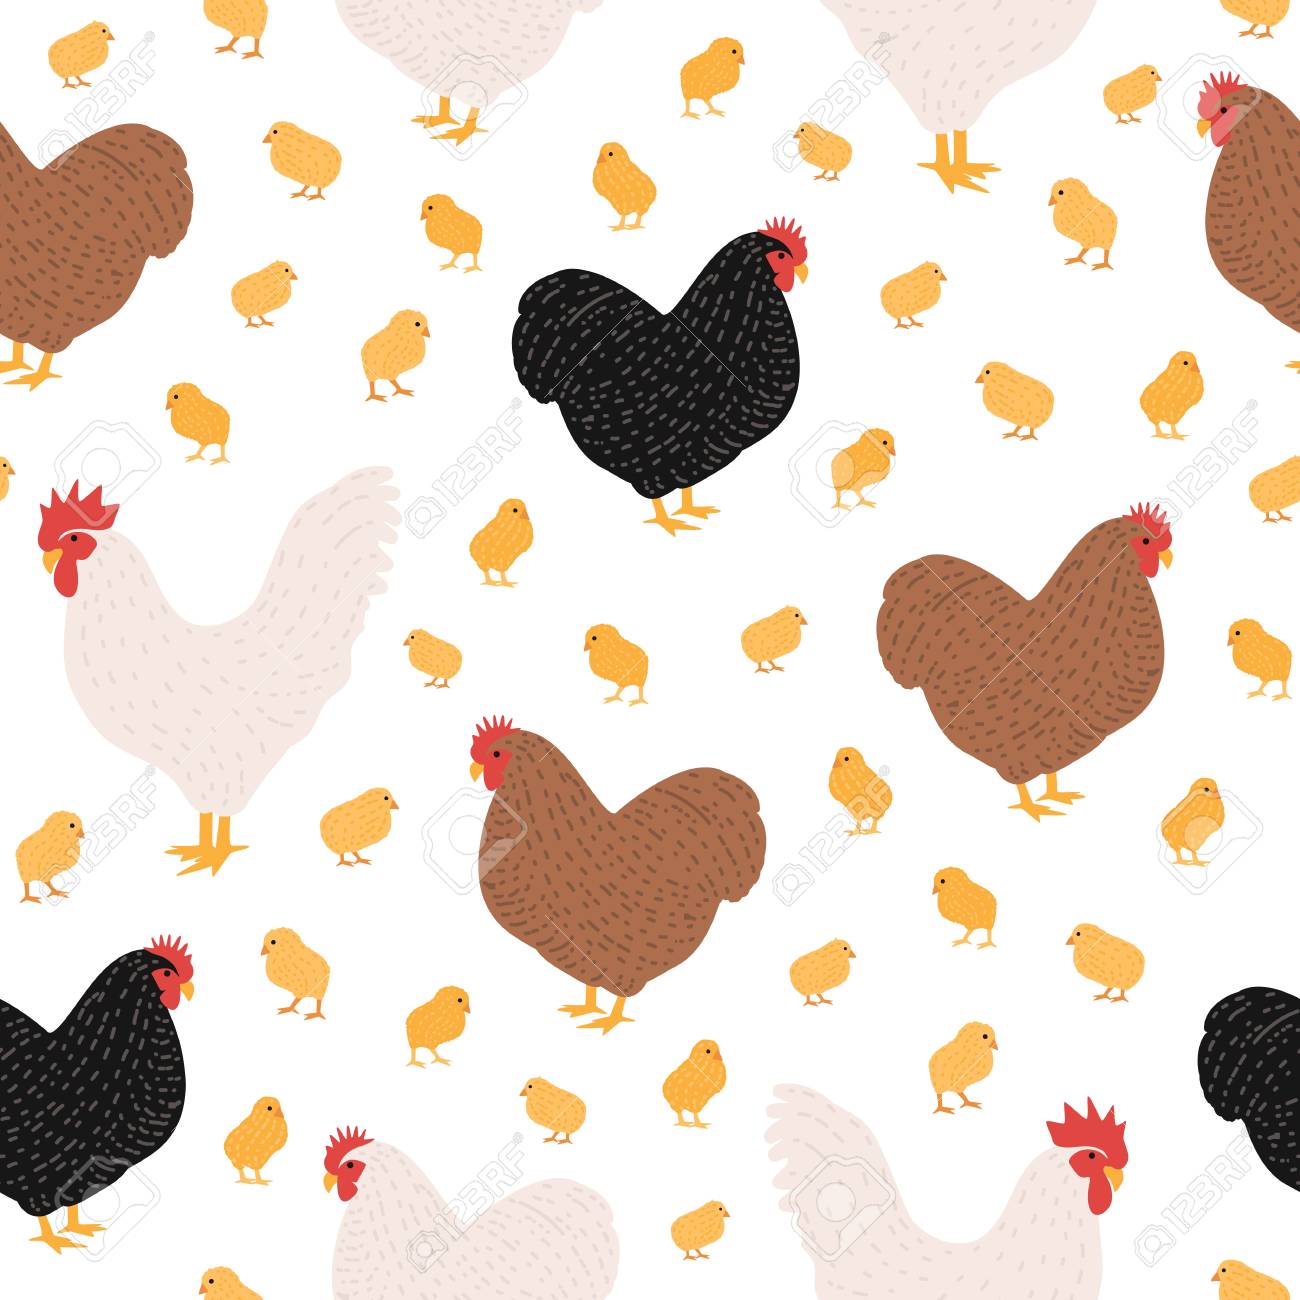 Seamless Pattern With Domestic Birds Or Farm Poultry On White